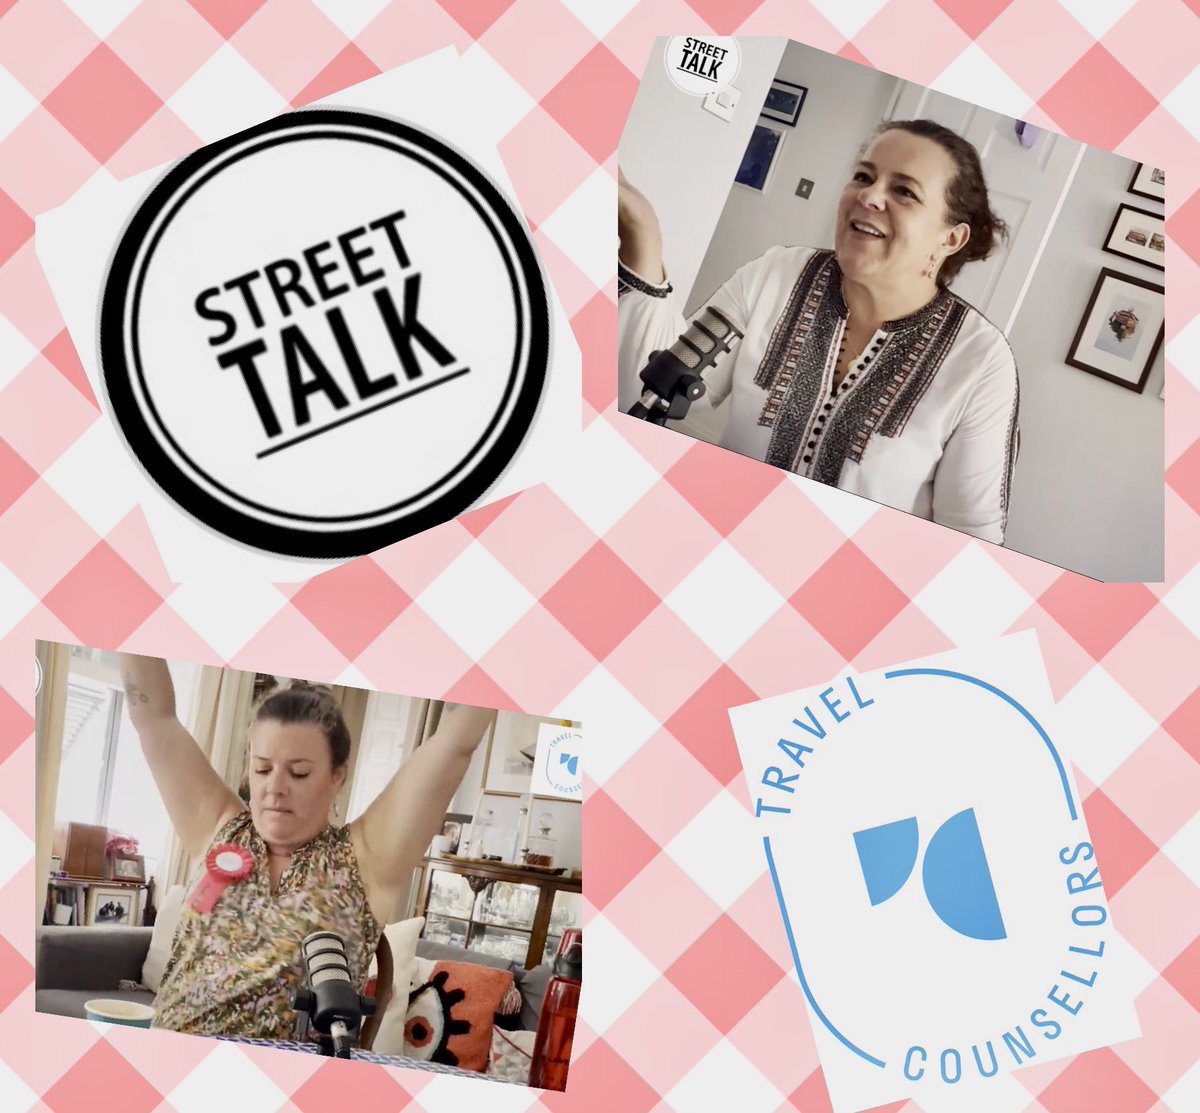 #Streettalk dropped! Watch youtu.be/NlJaHOpfmAU ; Listen shows.acast.com/on-the-sofa-wi…. The llanito podcast now on YouTube! We’re celebrating @SholiMcmoli’s birthday whoop whoop!!! #onthesofawithrouge #podcast #youtube #spilltheTEA #llanitopodcast